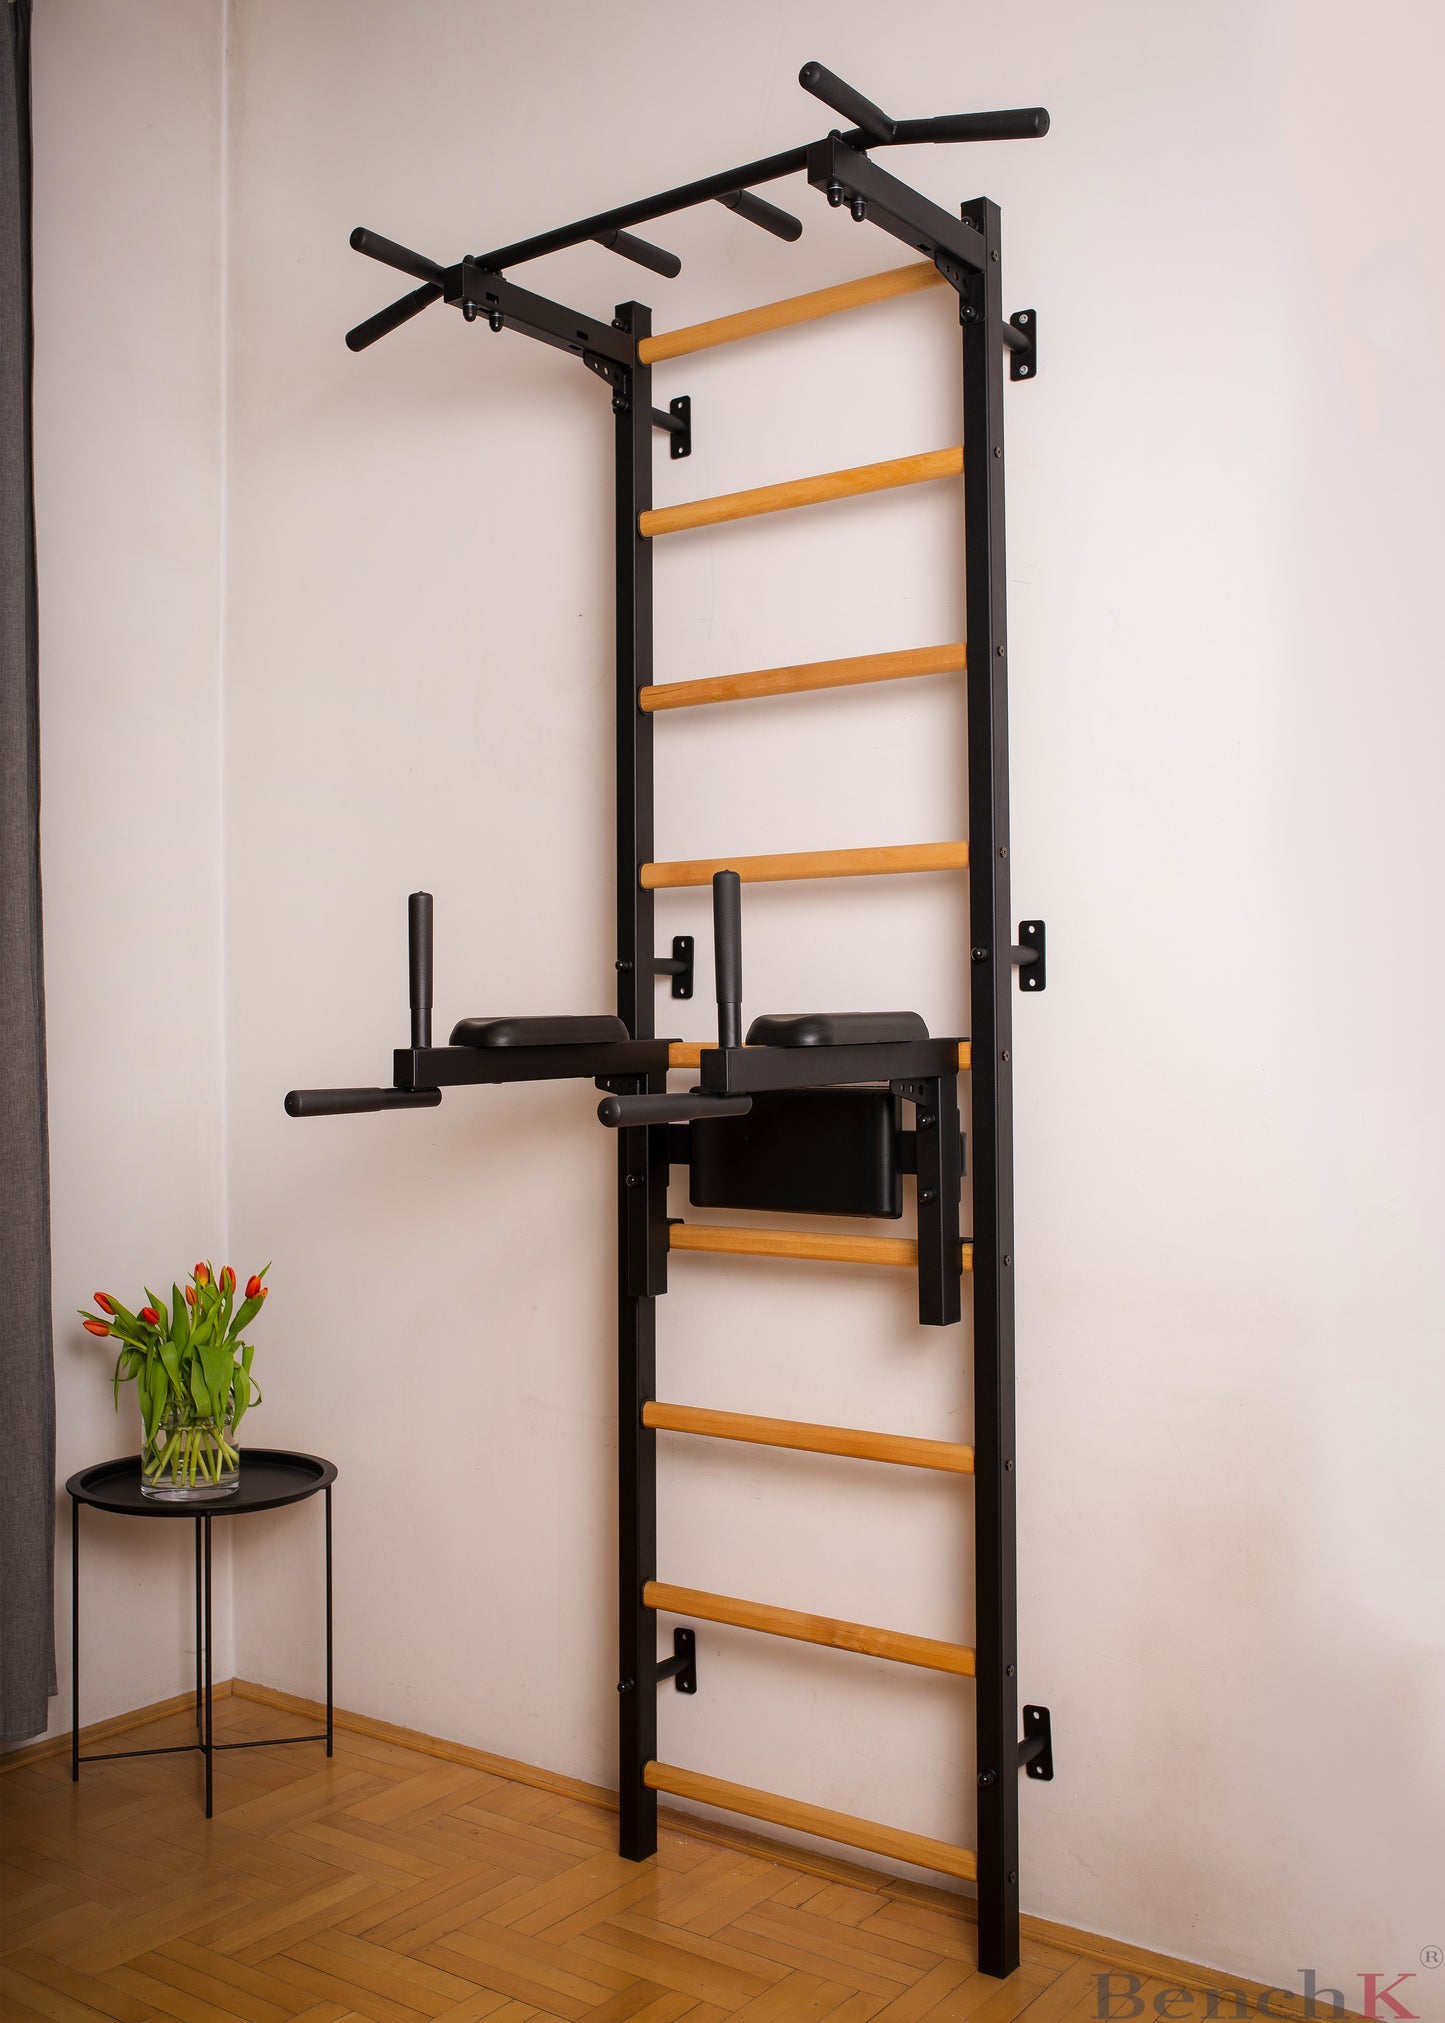 BenchK 722 - BenchK 7 Series Wall bars with fixed steel 6-grip pull-up bar and a dip bar with back support